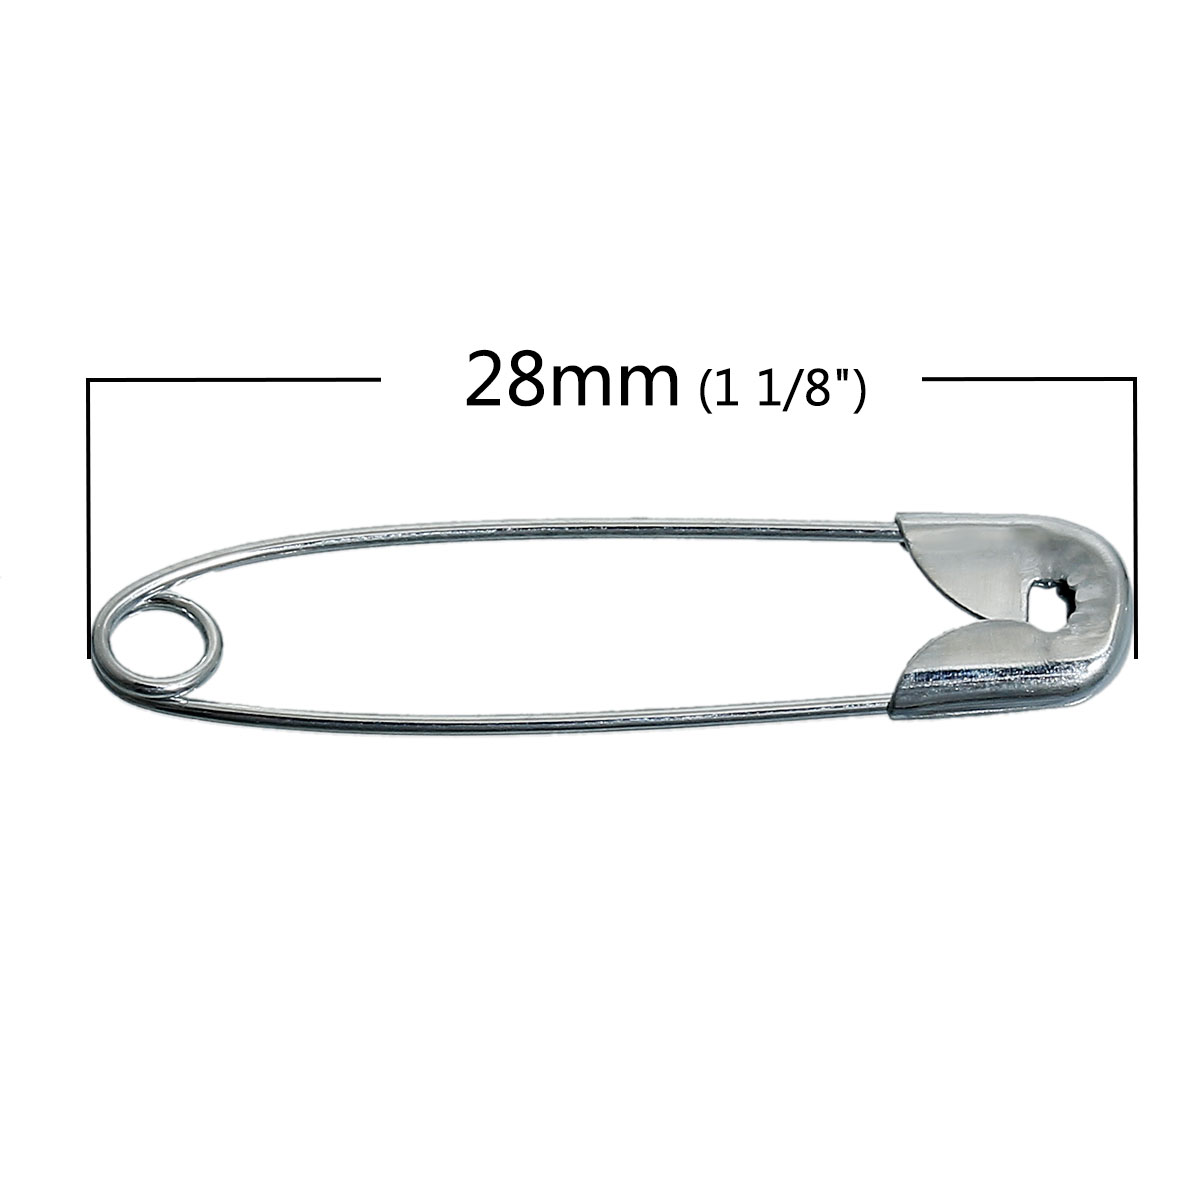 Picture of Iron Based Alloy Safety Pins Findings Silver Tone 28mm x6mm(1 1/8" x 2/8") - 27mm x6mm(1 1/8" x 2/8"), 200 PCs